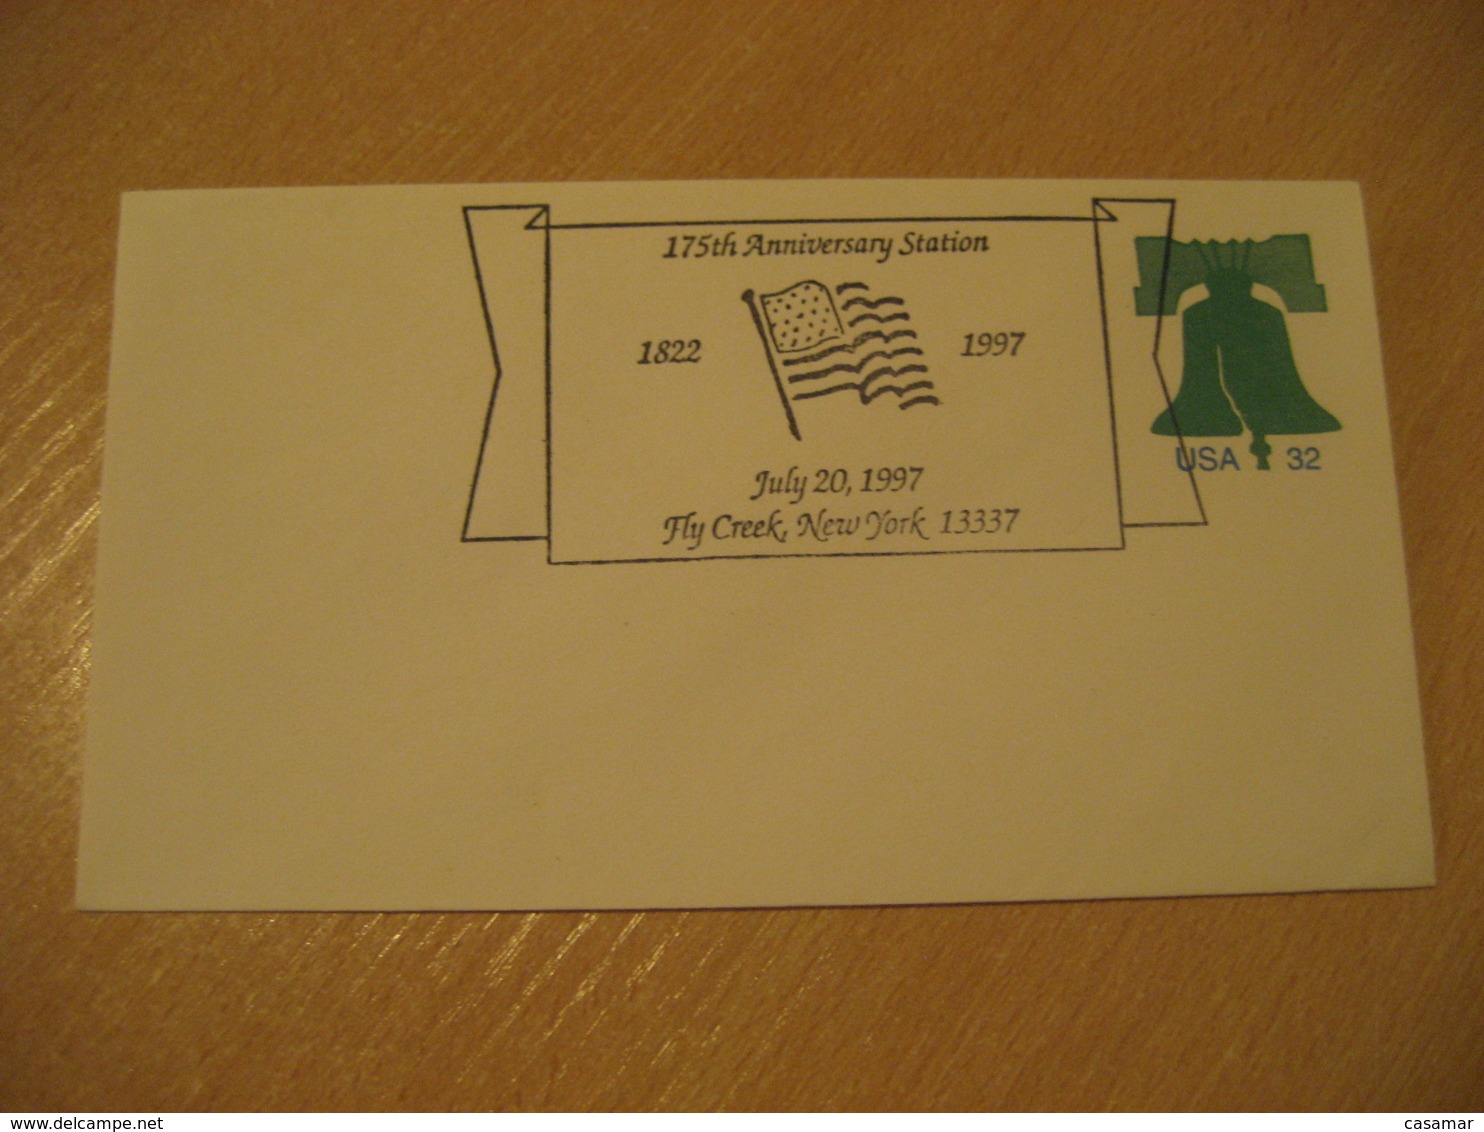 FLY CREEK 1997 Flag Flags Cancel Cover USA - Enveloppes